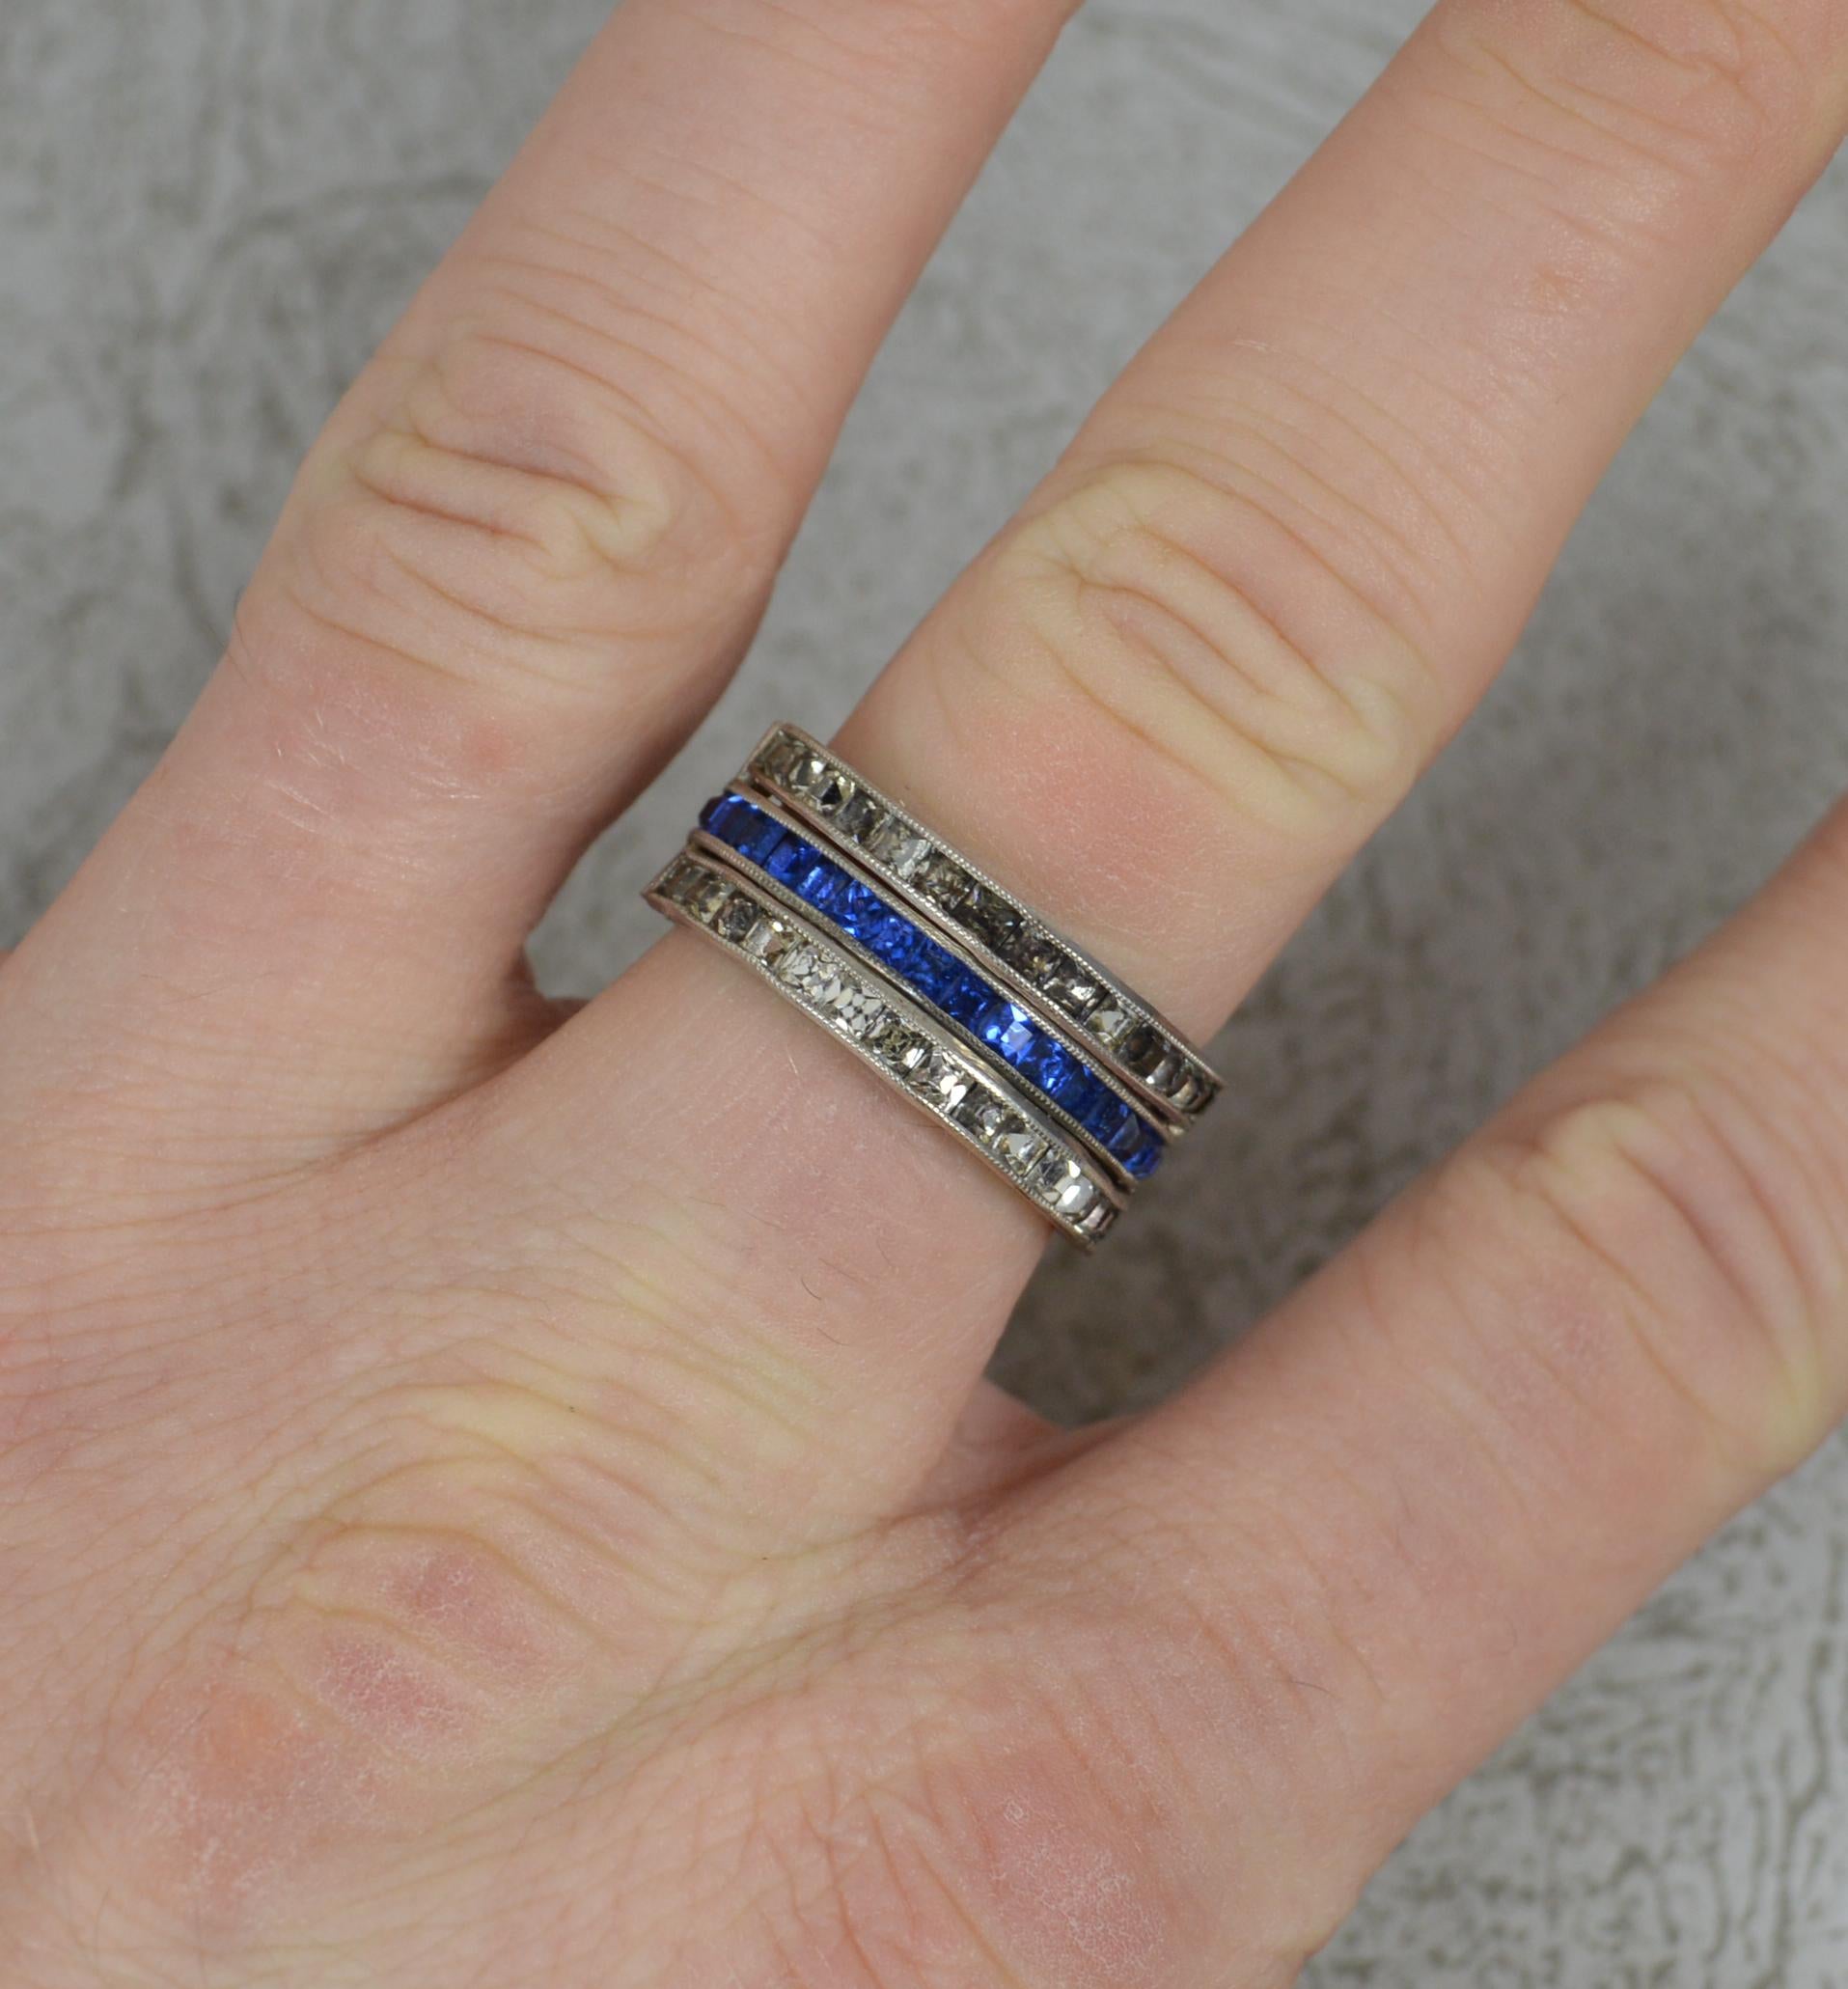 A fine art deco era ring, circa 1920.
Sterling silver example.
A full eternity example, day and night design. Half set with princess cut blue paste and the other princess cut red paste. Then complete with two hinged sections of princess cut white